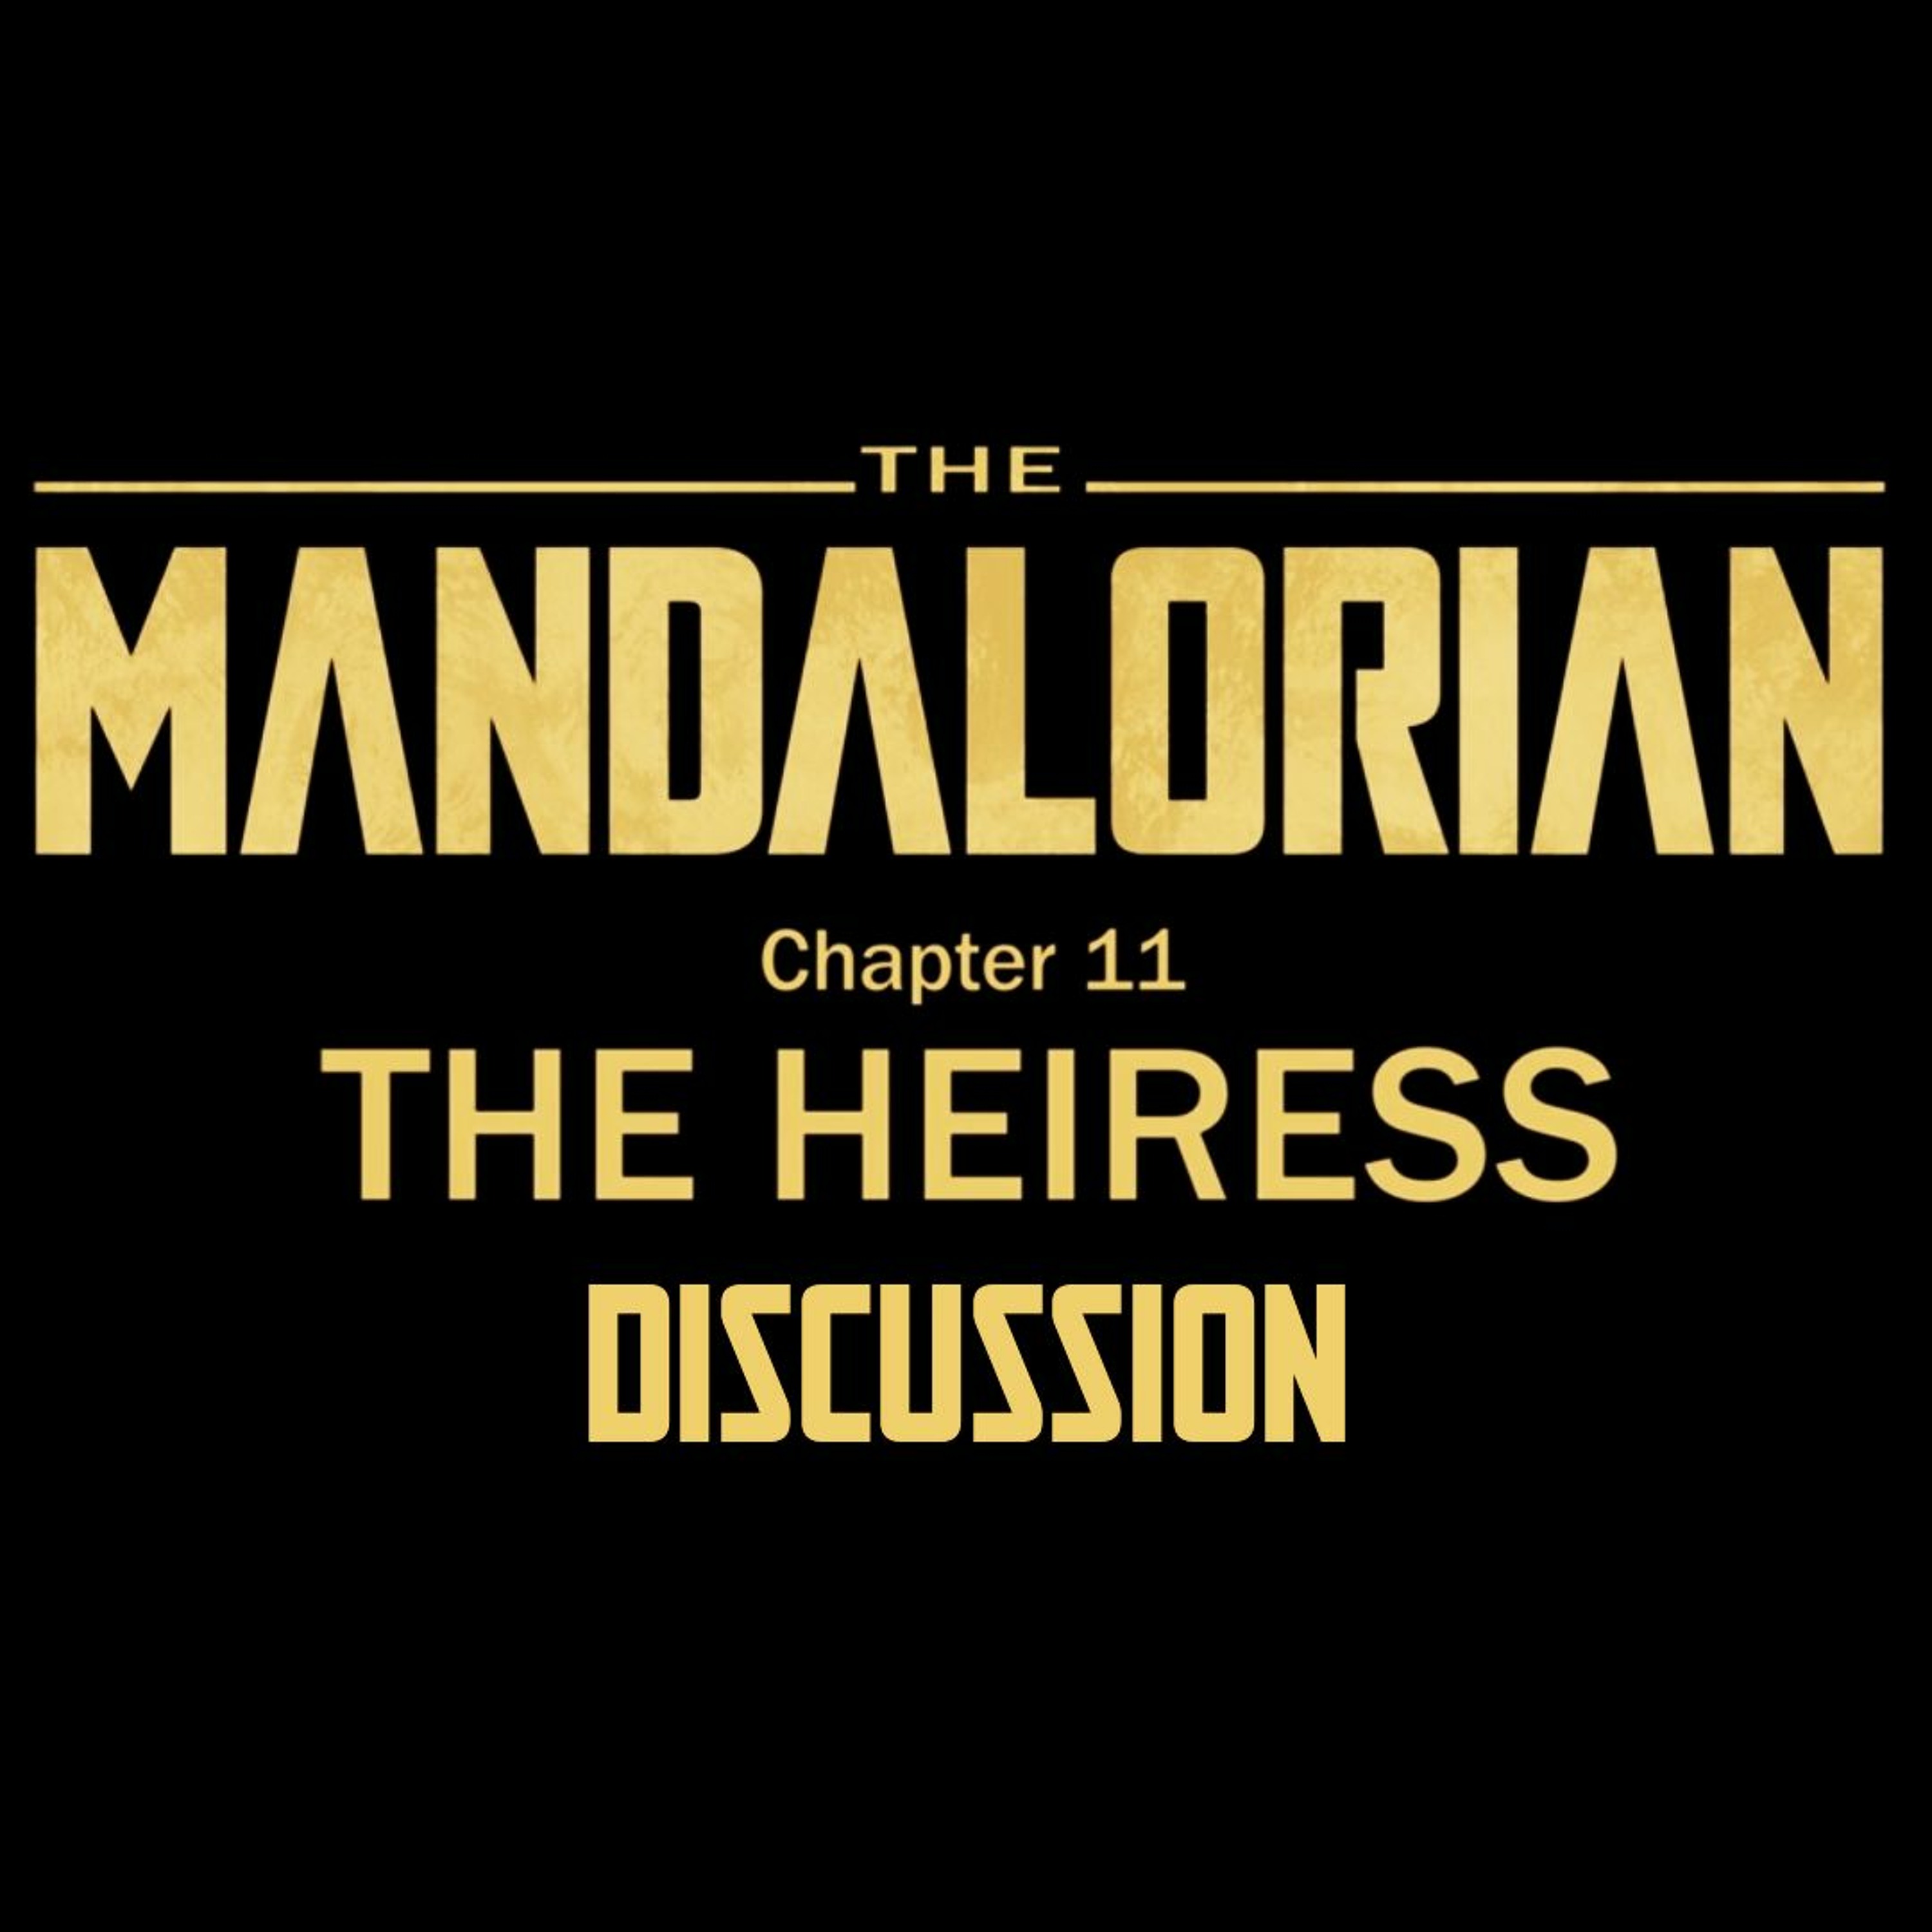 The Mandalorian Chapter 11 - The Heiress